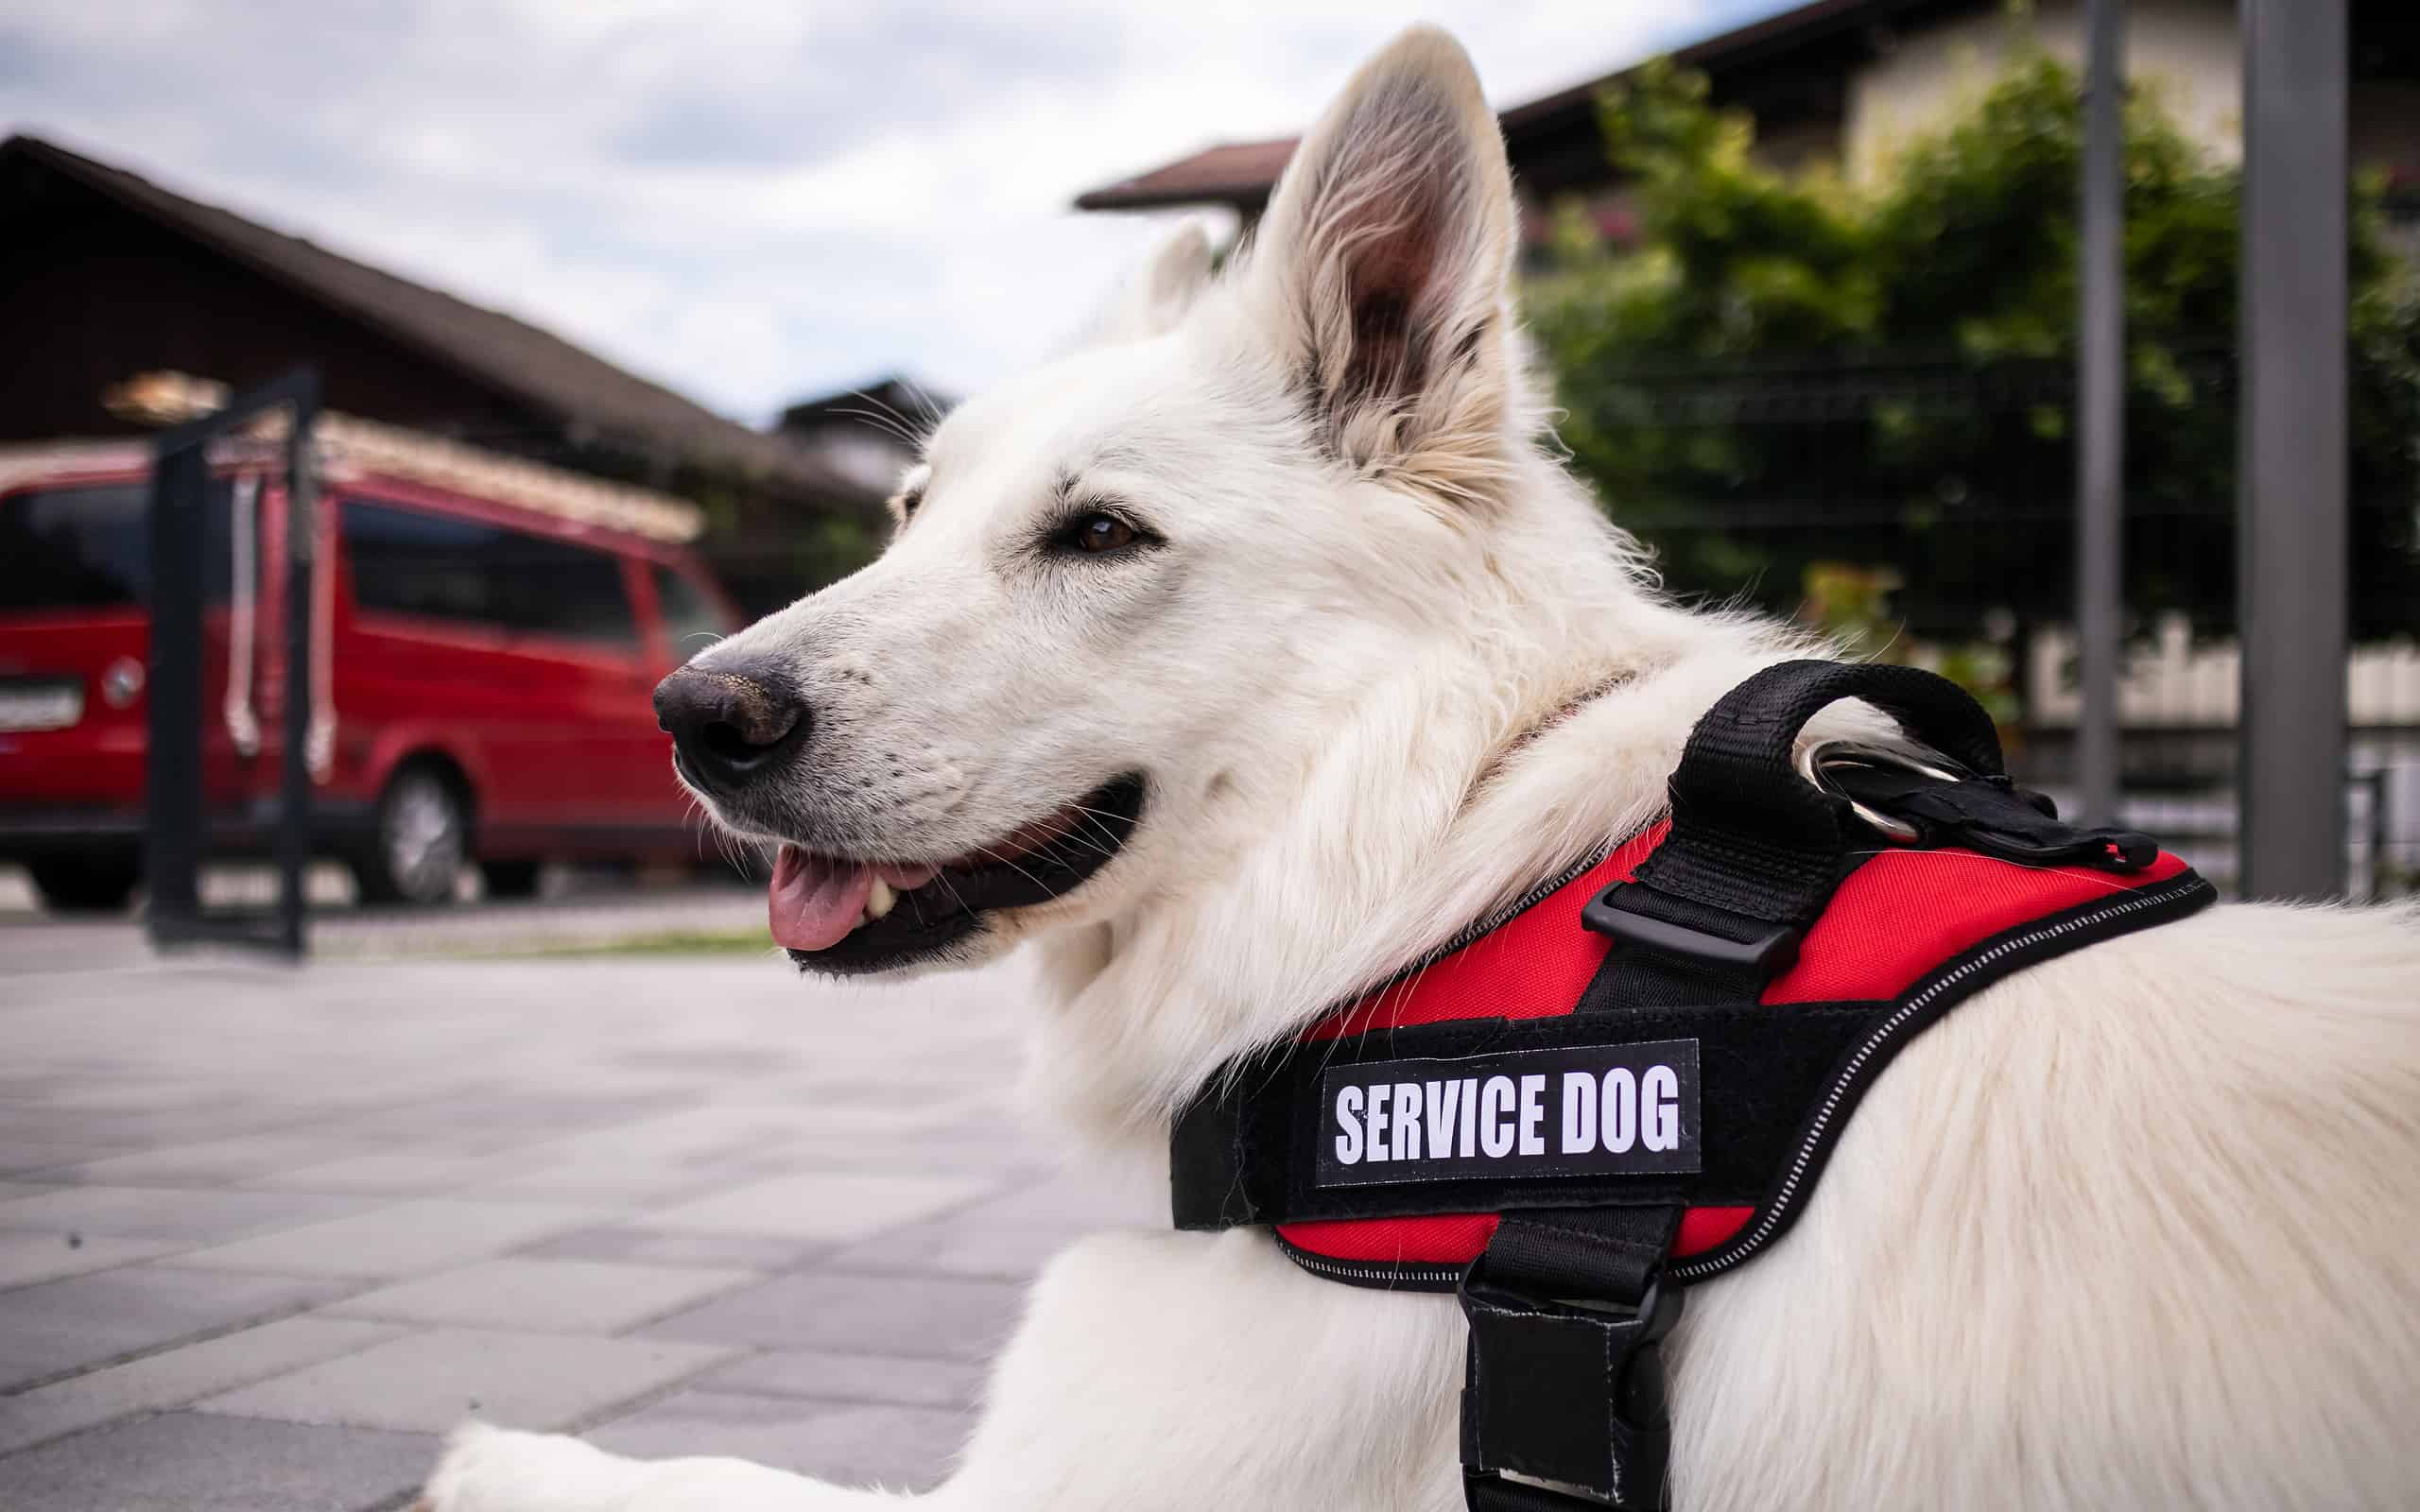 Man with disability and service dog